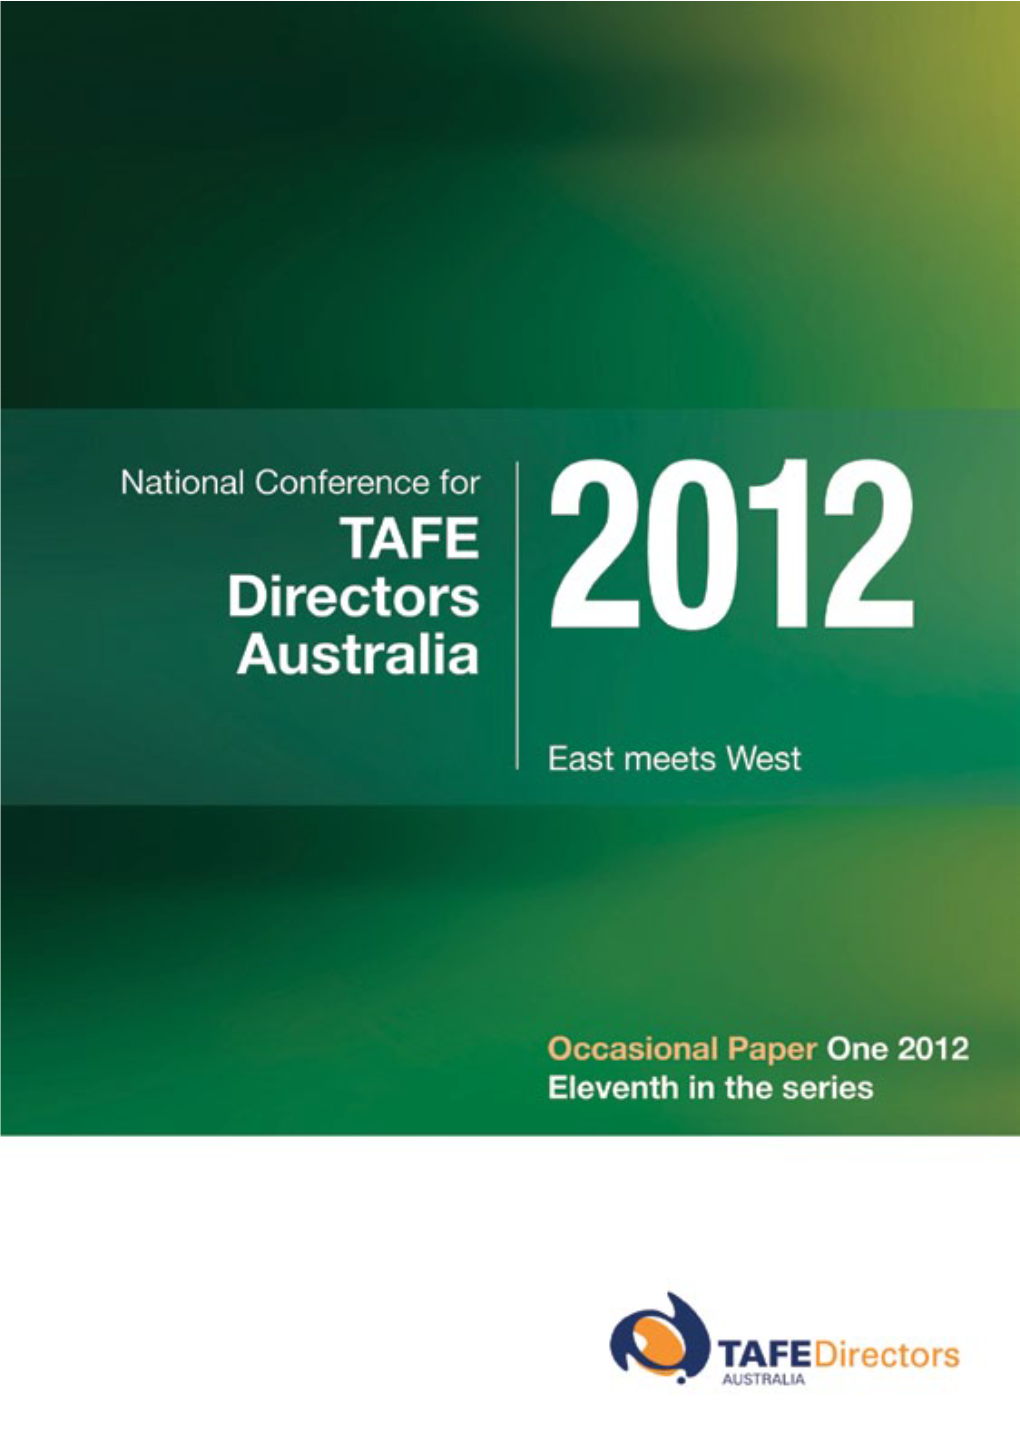 Occasional Paper One 2012